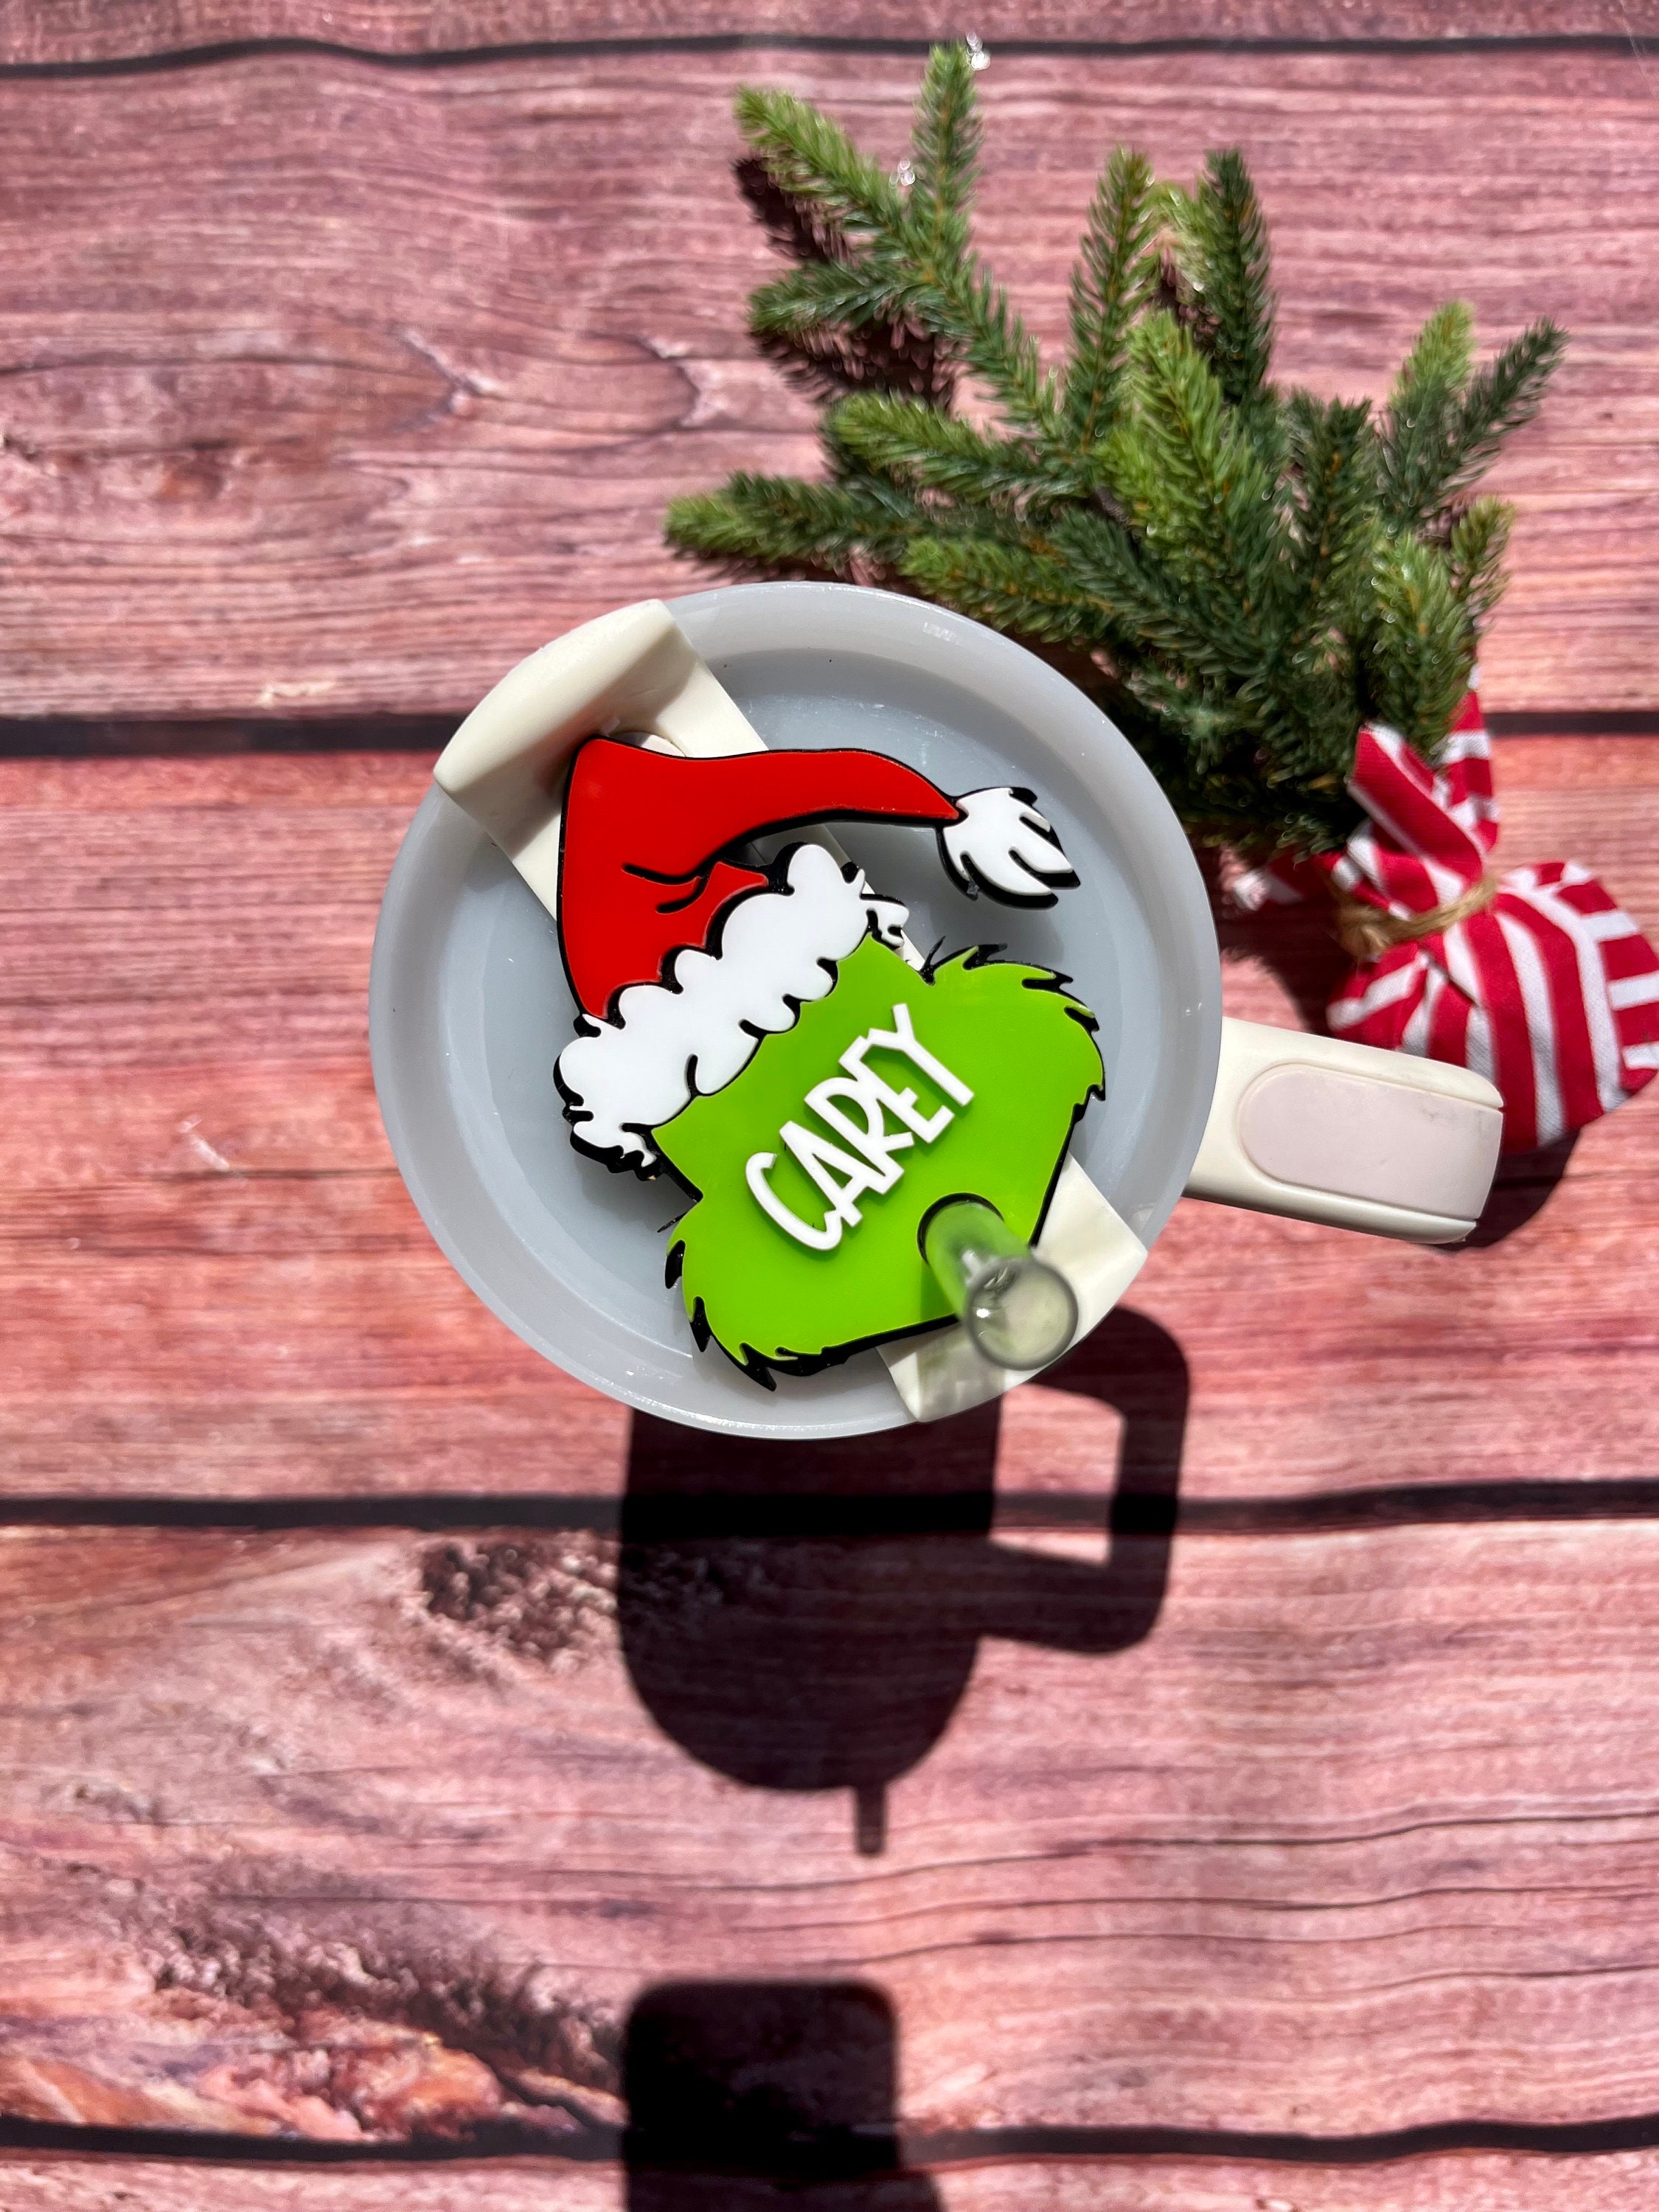 Grinch Christmas Decorations Indoor, 2 PCS Paper Cups Filled with  Artificial Whipped Cream for Table, Tiered Tray, Kitchen Coffee Bar Grinch  Decor